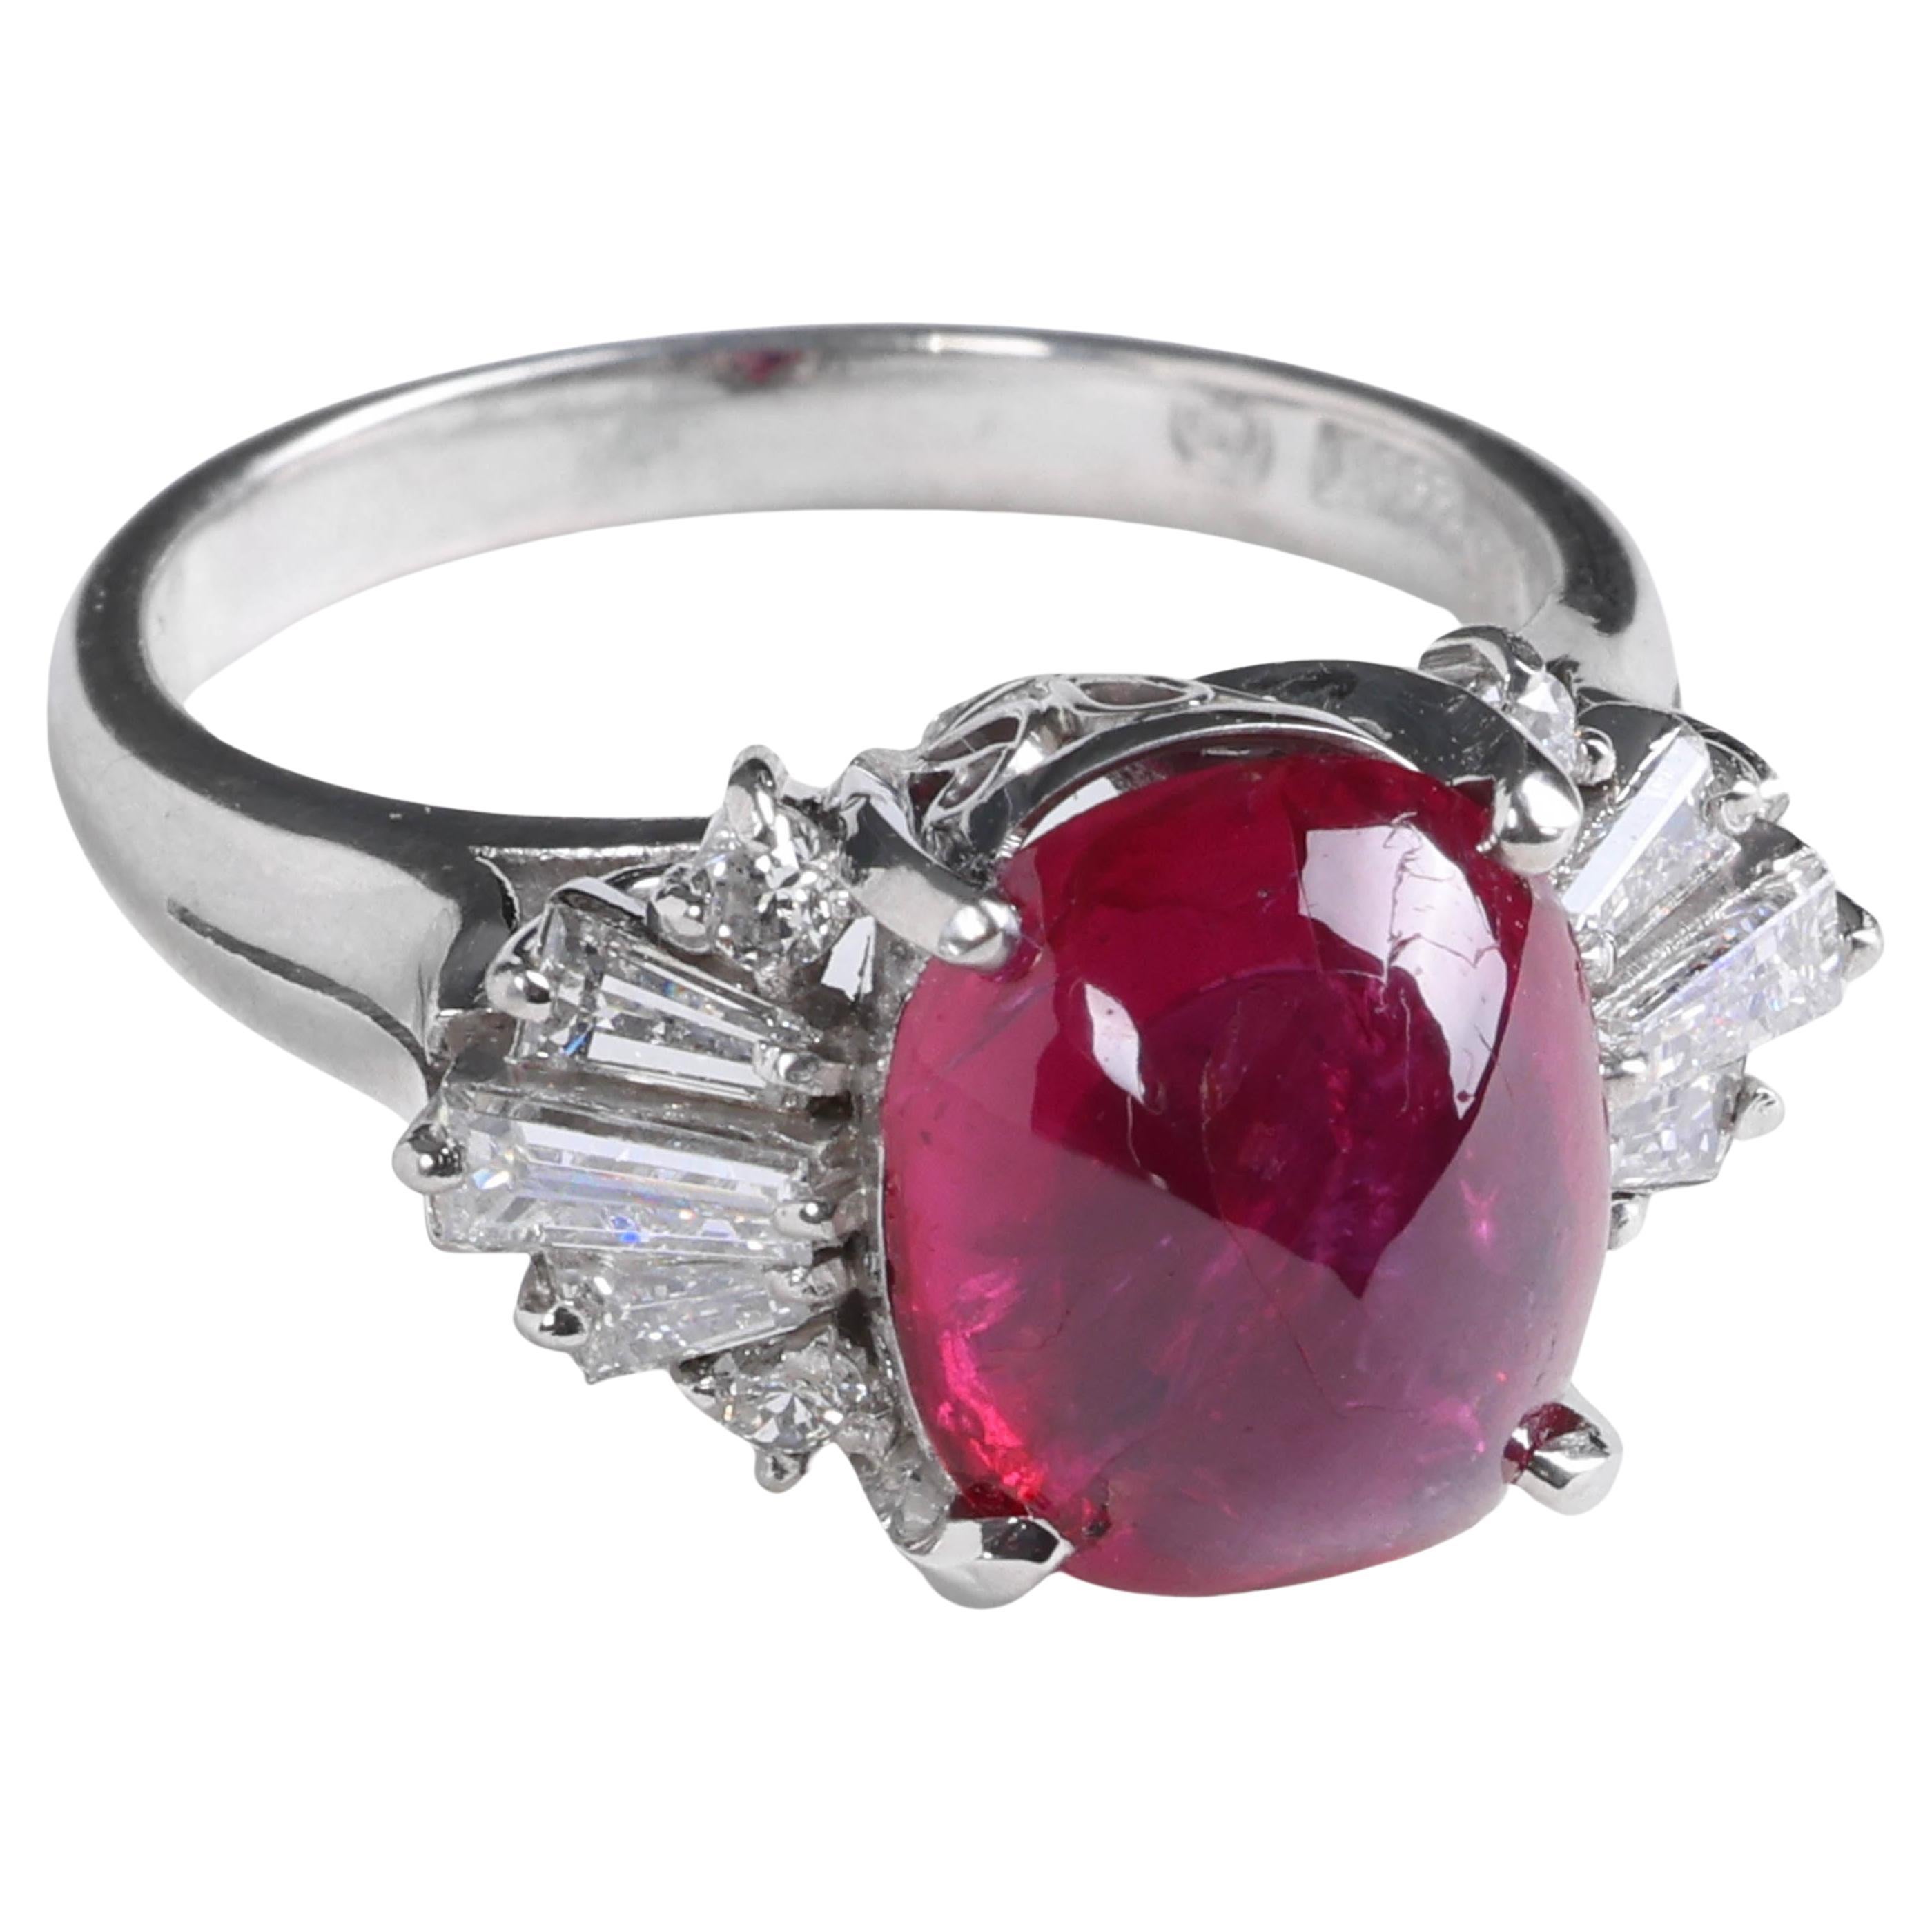 An enormous, spectacular four-carat cabochon-cut vivid pinkish-red no-heat Burma ruby commands attention in this extraordinary platinum Mid-century ring. The stoplight-red ruby measures 10.33mm x 8.74mm x 4.84mm and weighs 4.75 carats. Three sleek